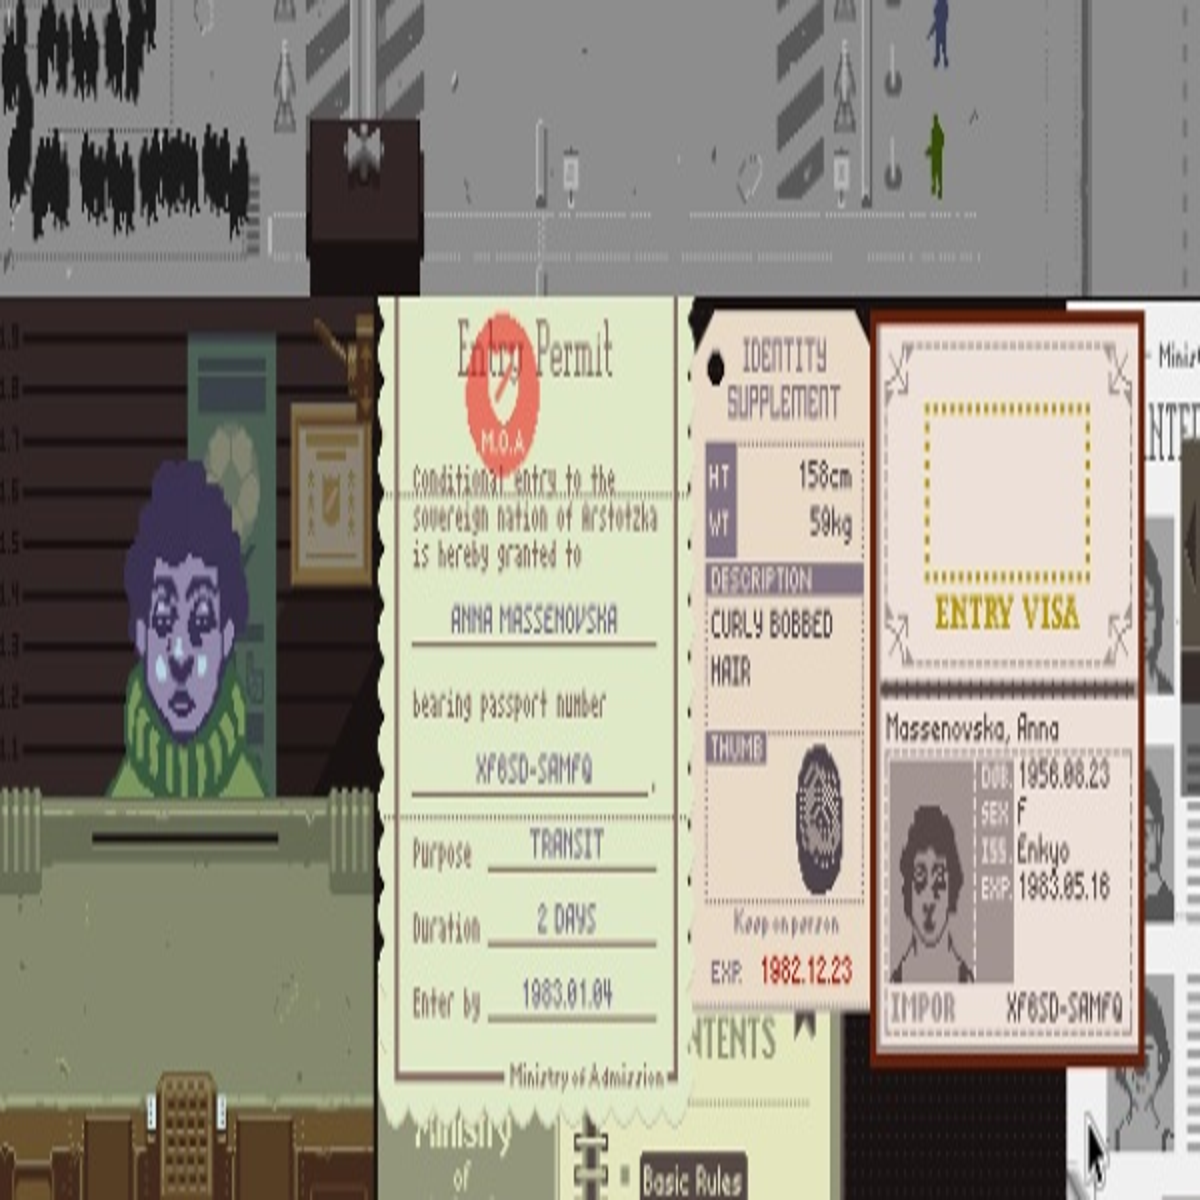 Papers, Please Review - IGN